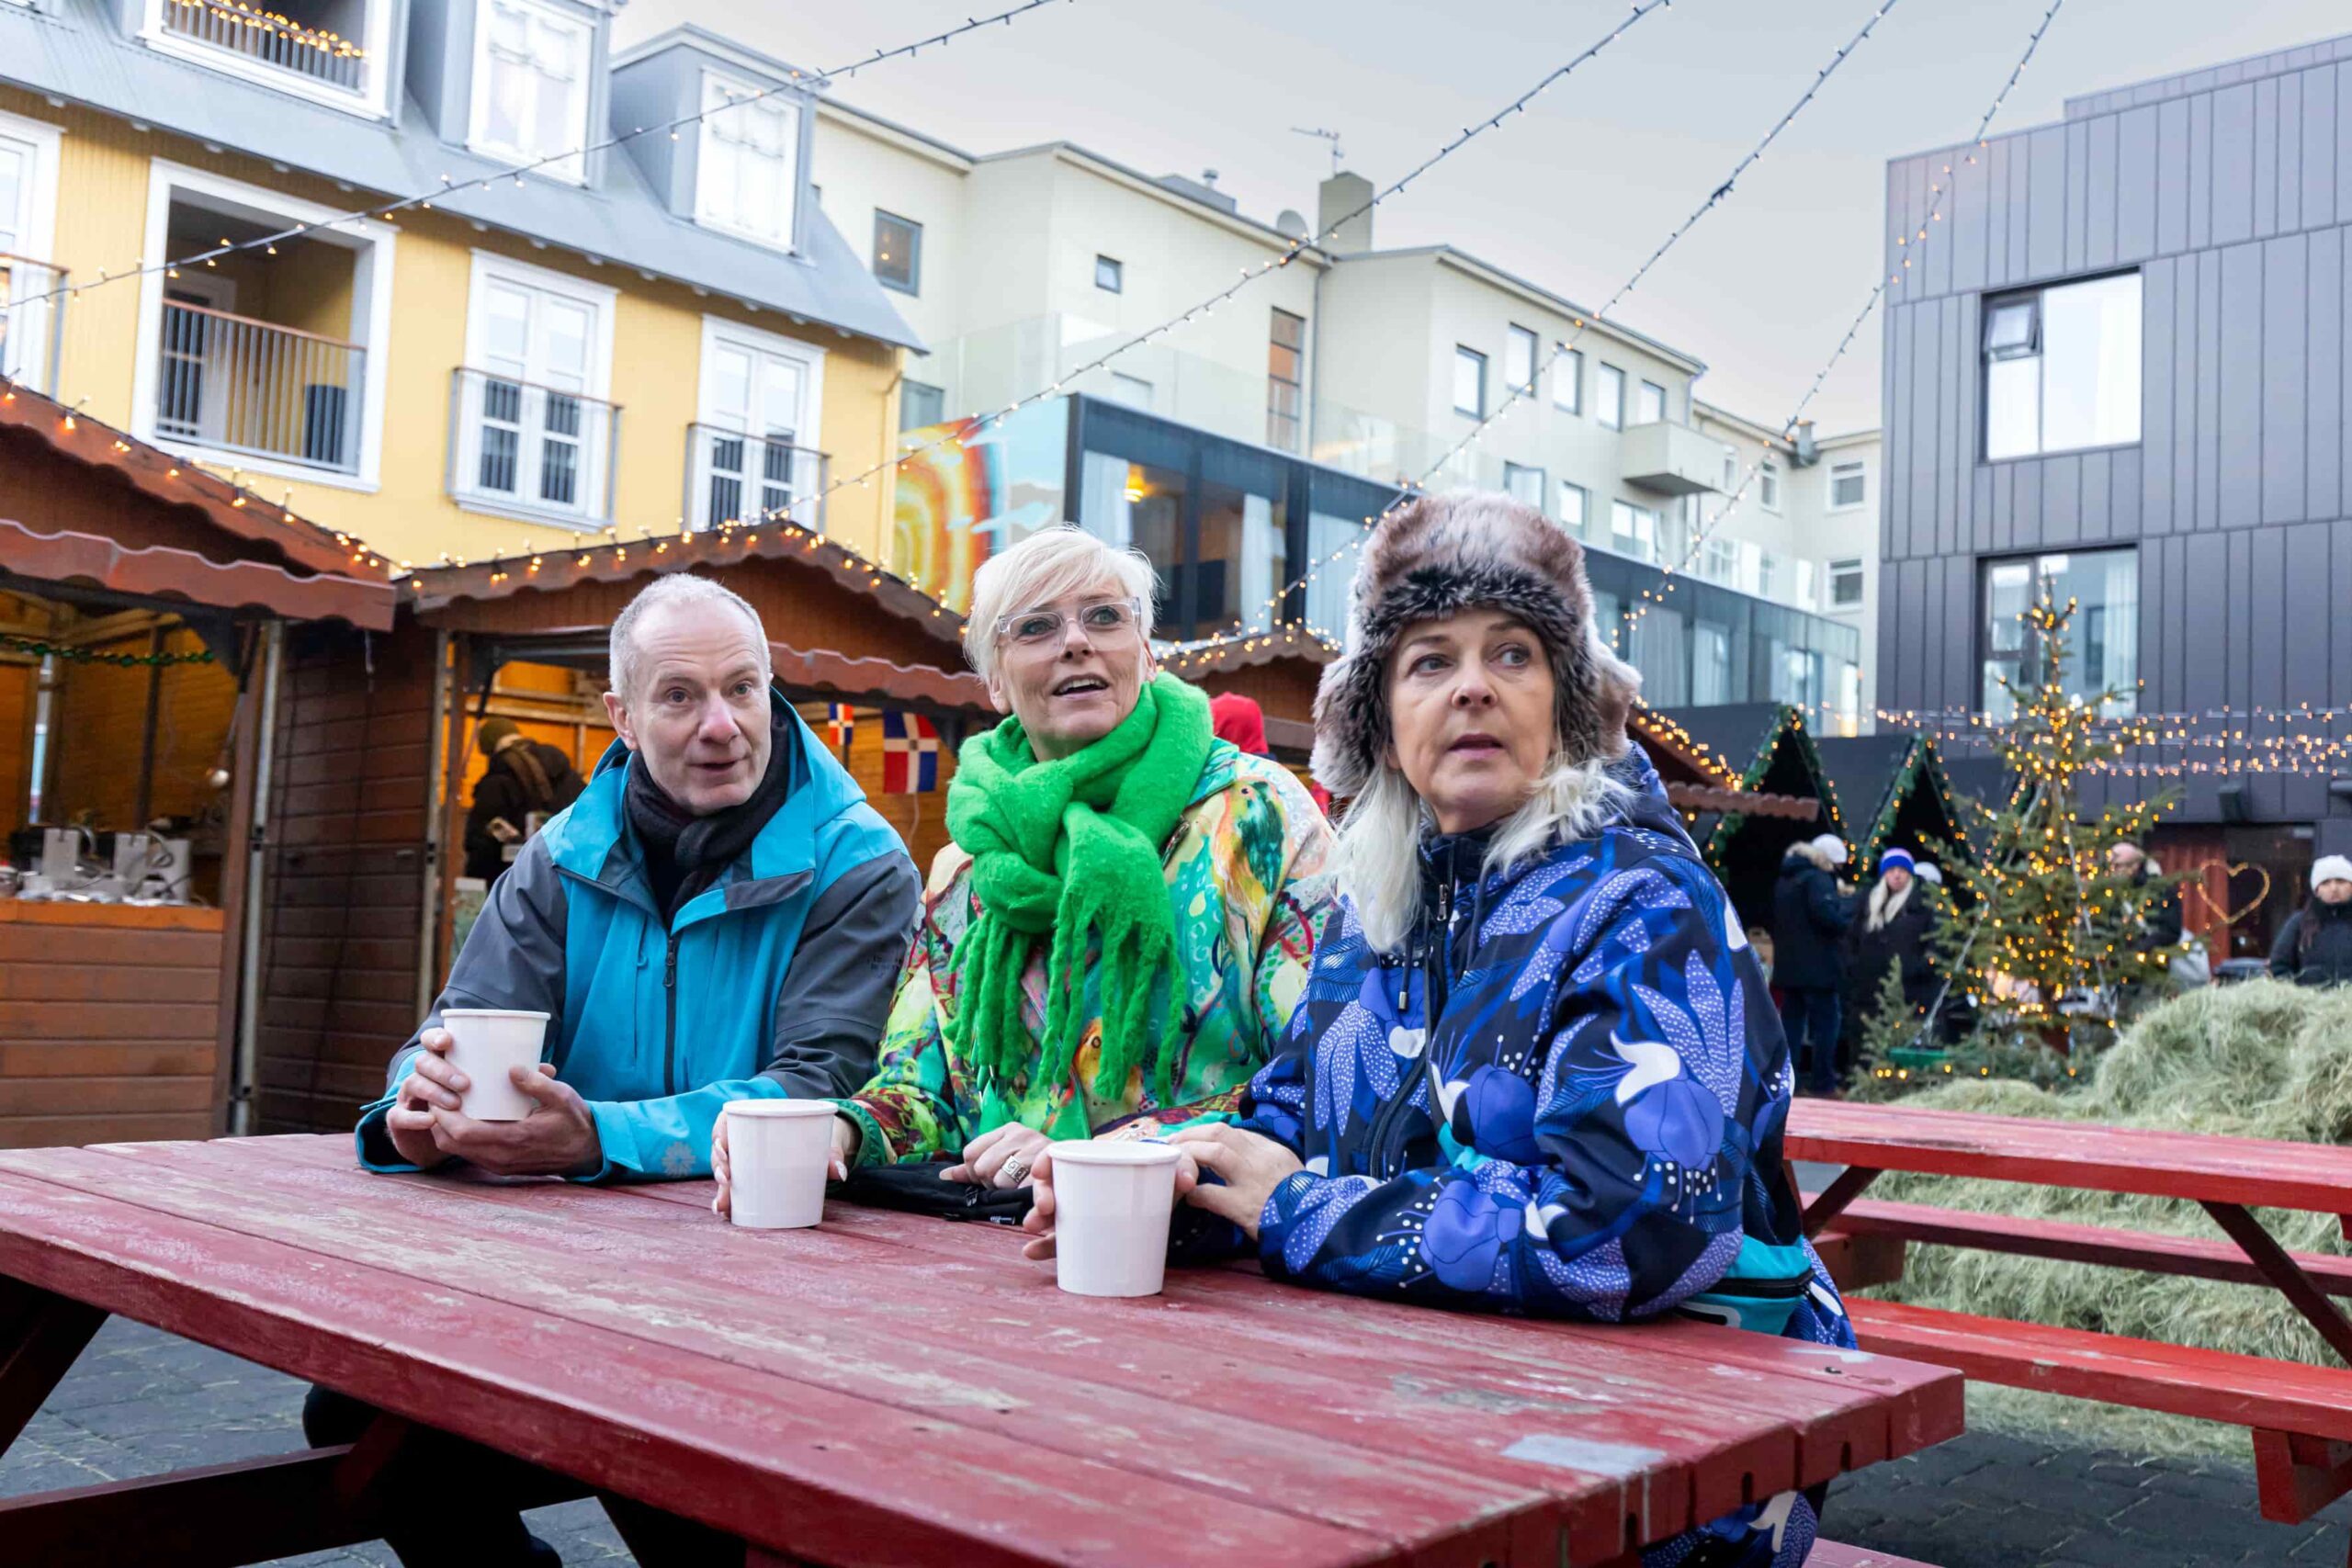 A tour group from Your Friend in Reykjavik enjoying a coffee together